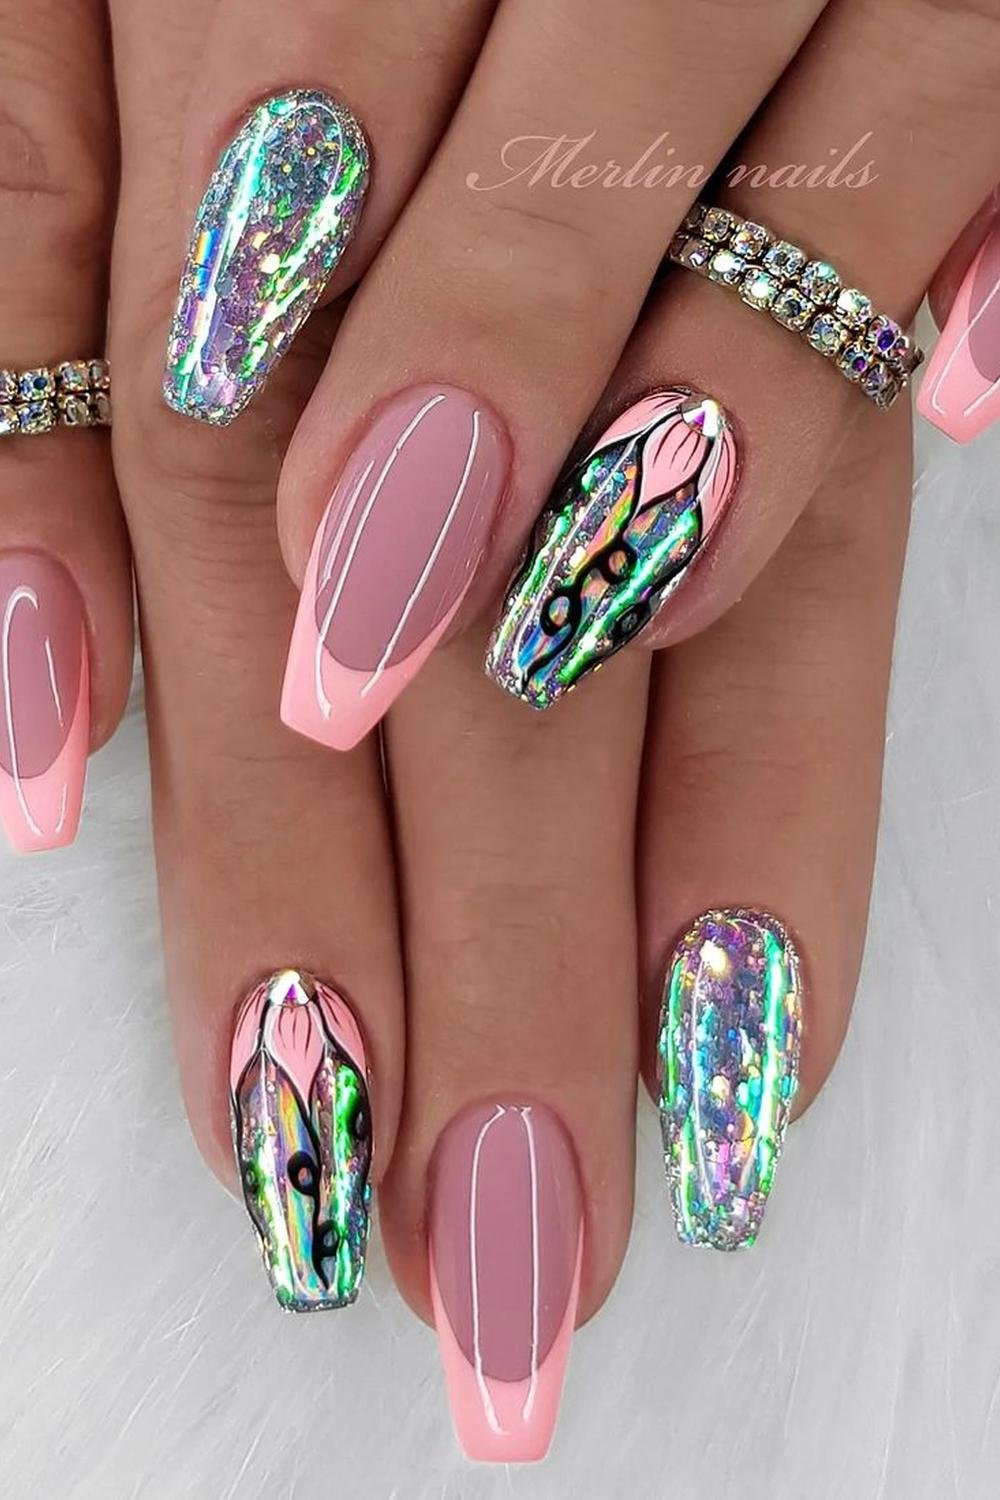 14 - Picture of Ballerina Nails